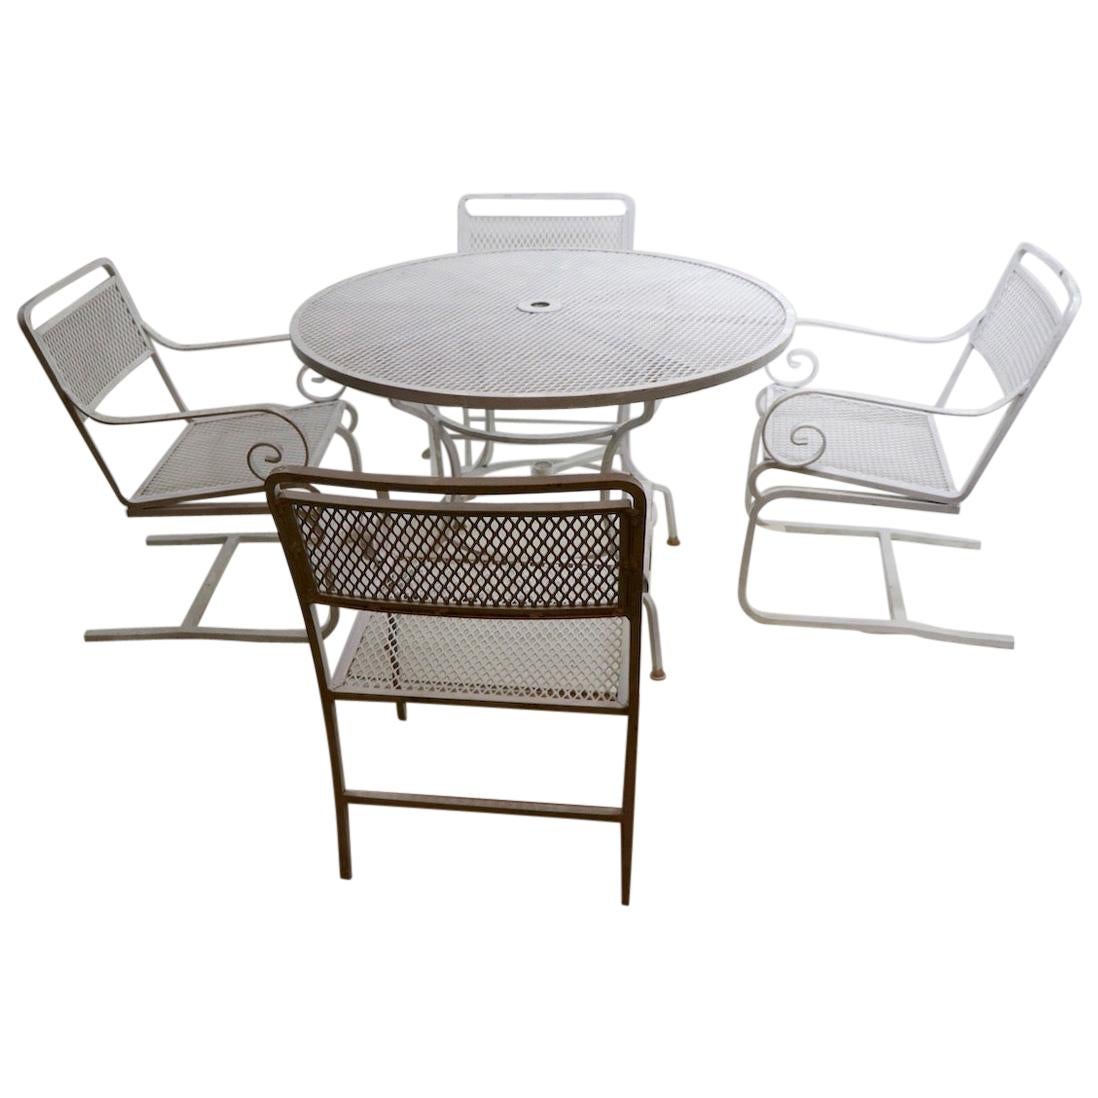 5 Pc. Neoclassic Hollywood Regency Patio Dining Set of Cast Aluminum and Steel For Sale